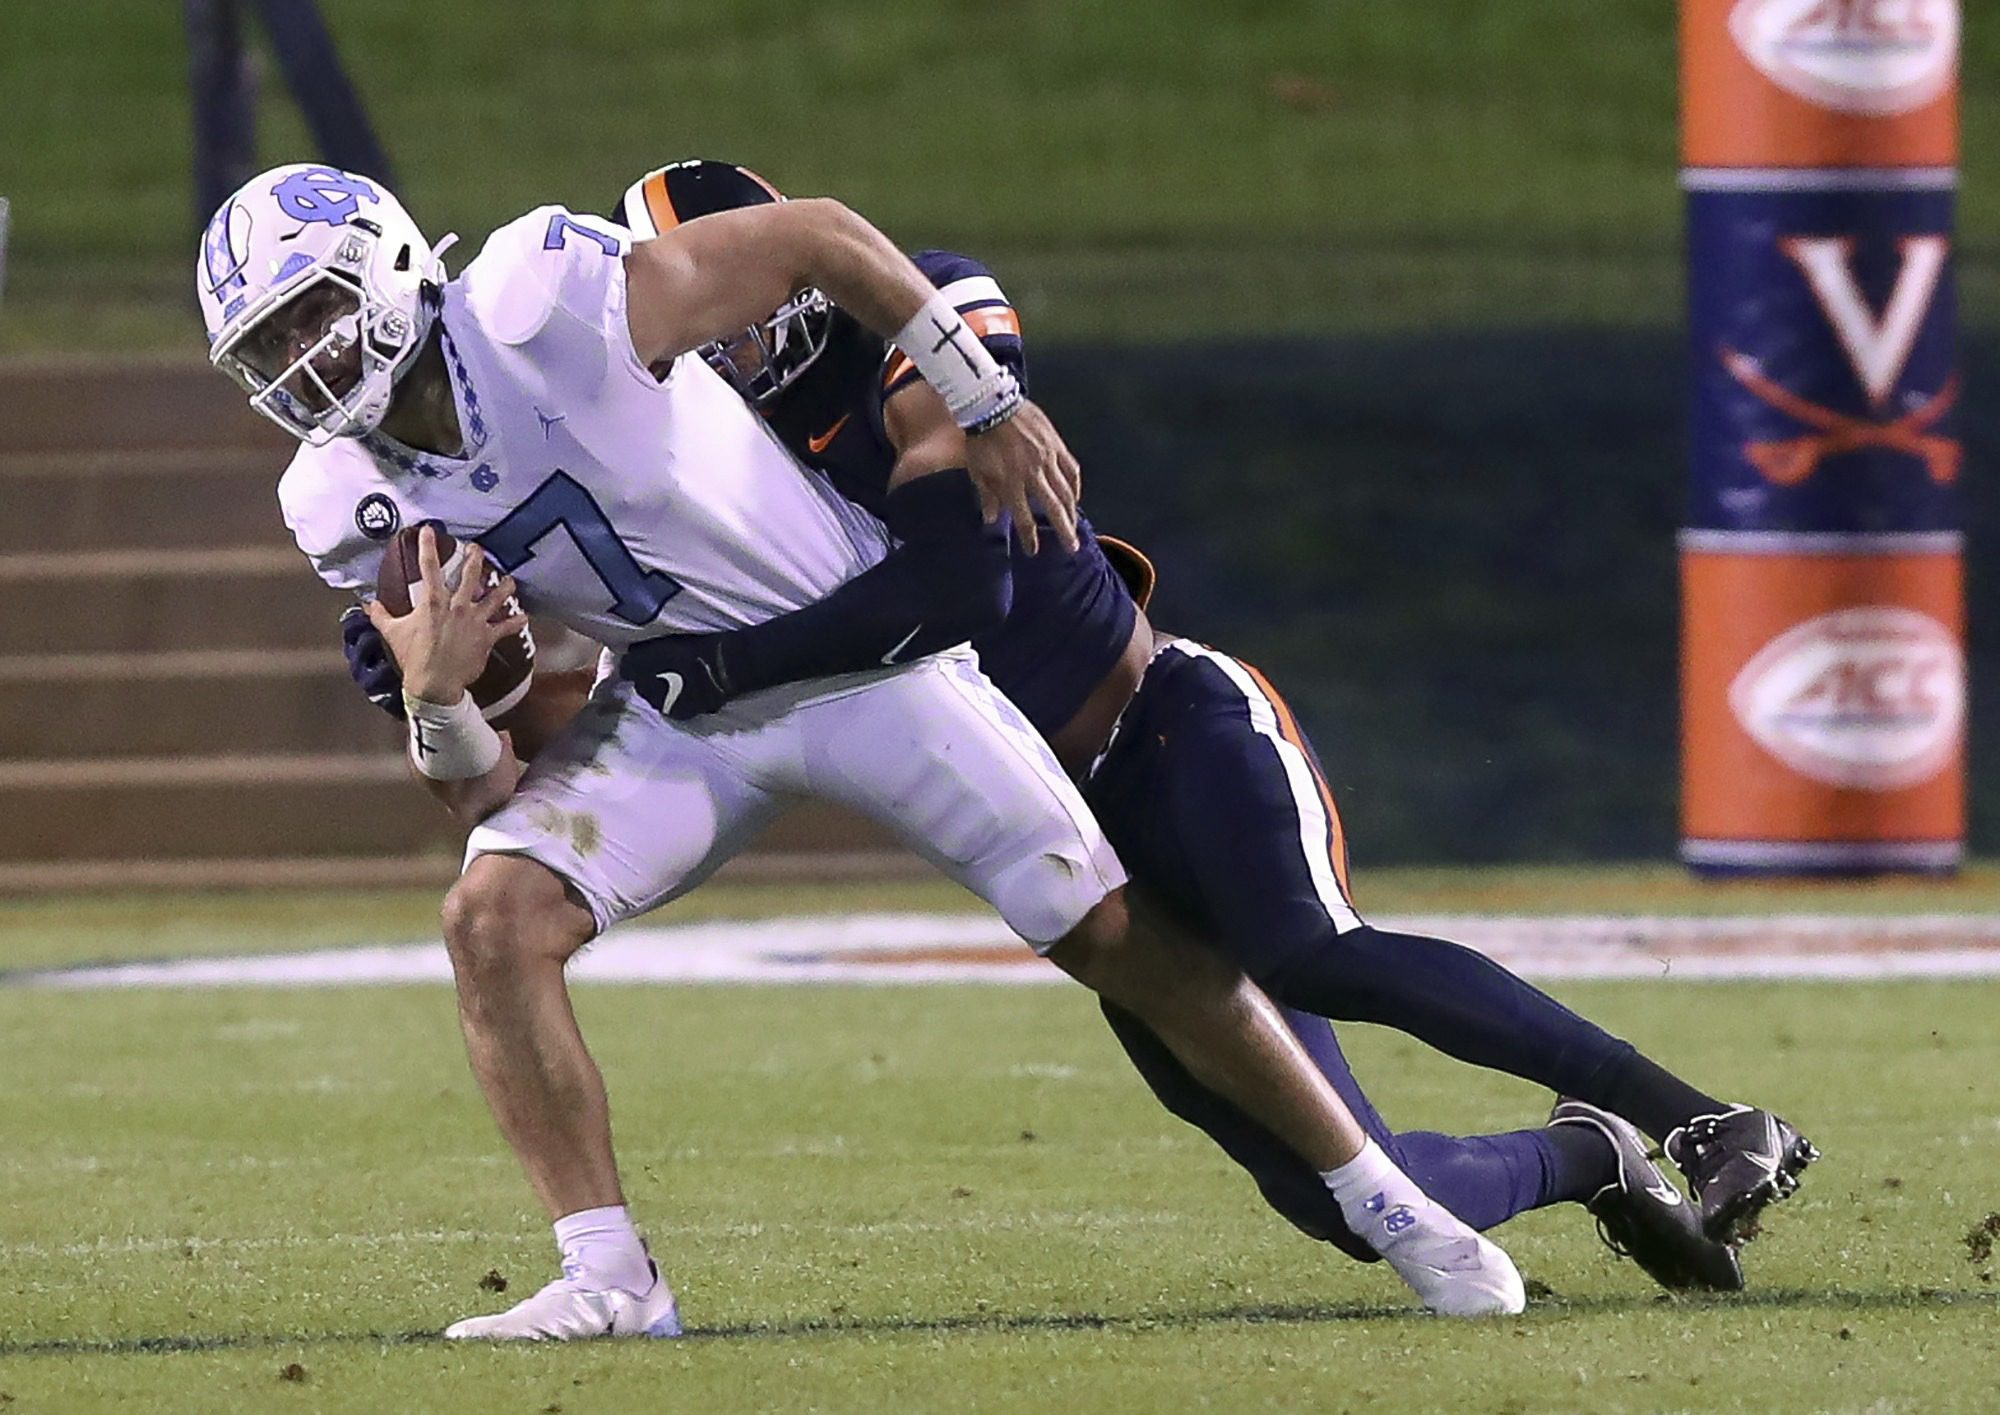 Tar Heels can’t overcome their own mistakes in loss at UVa